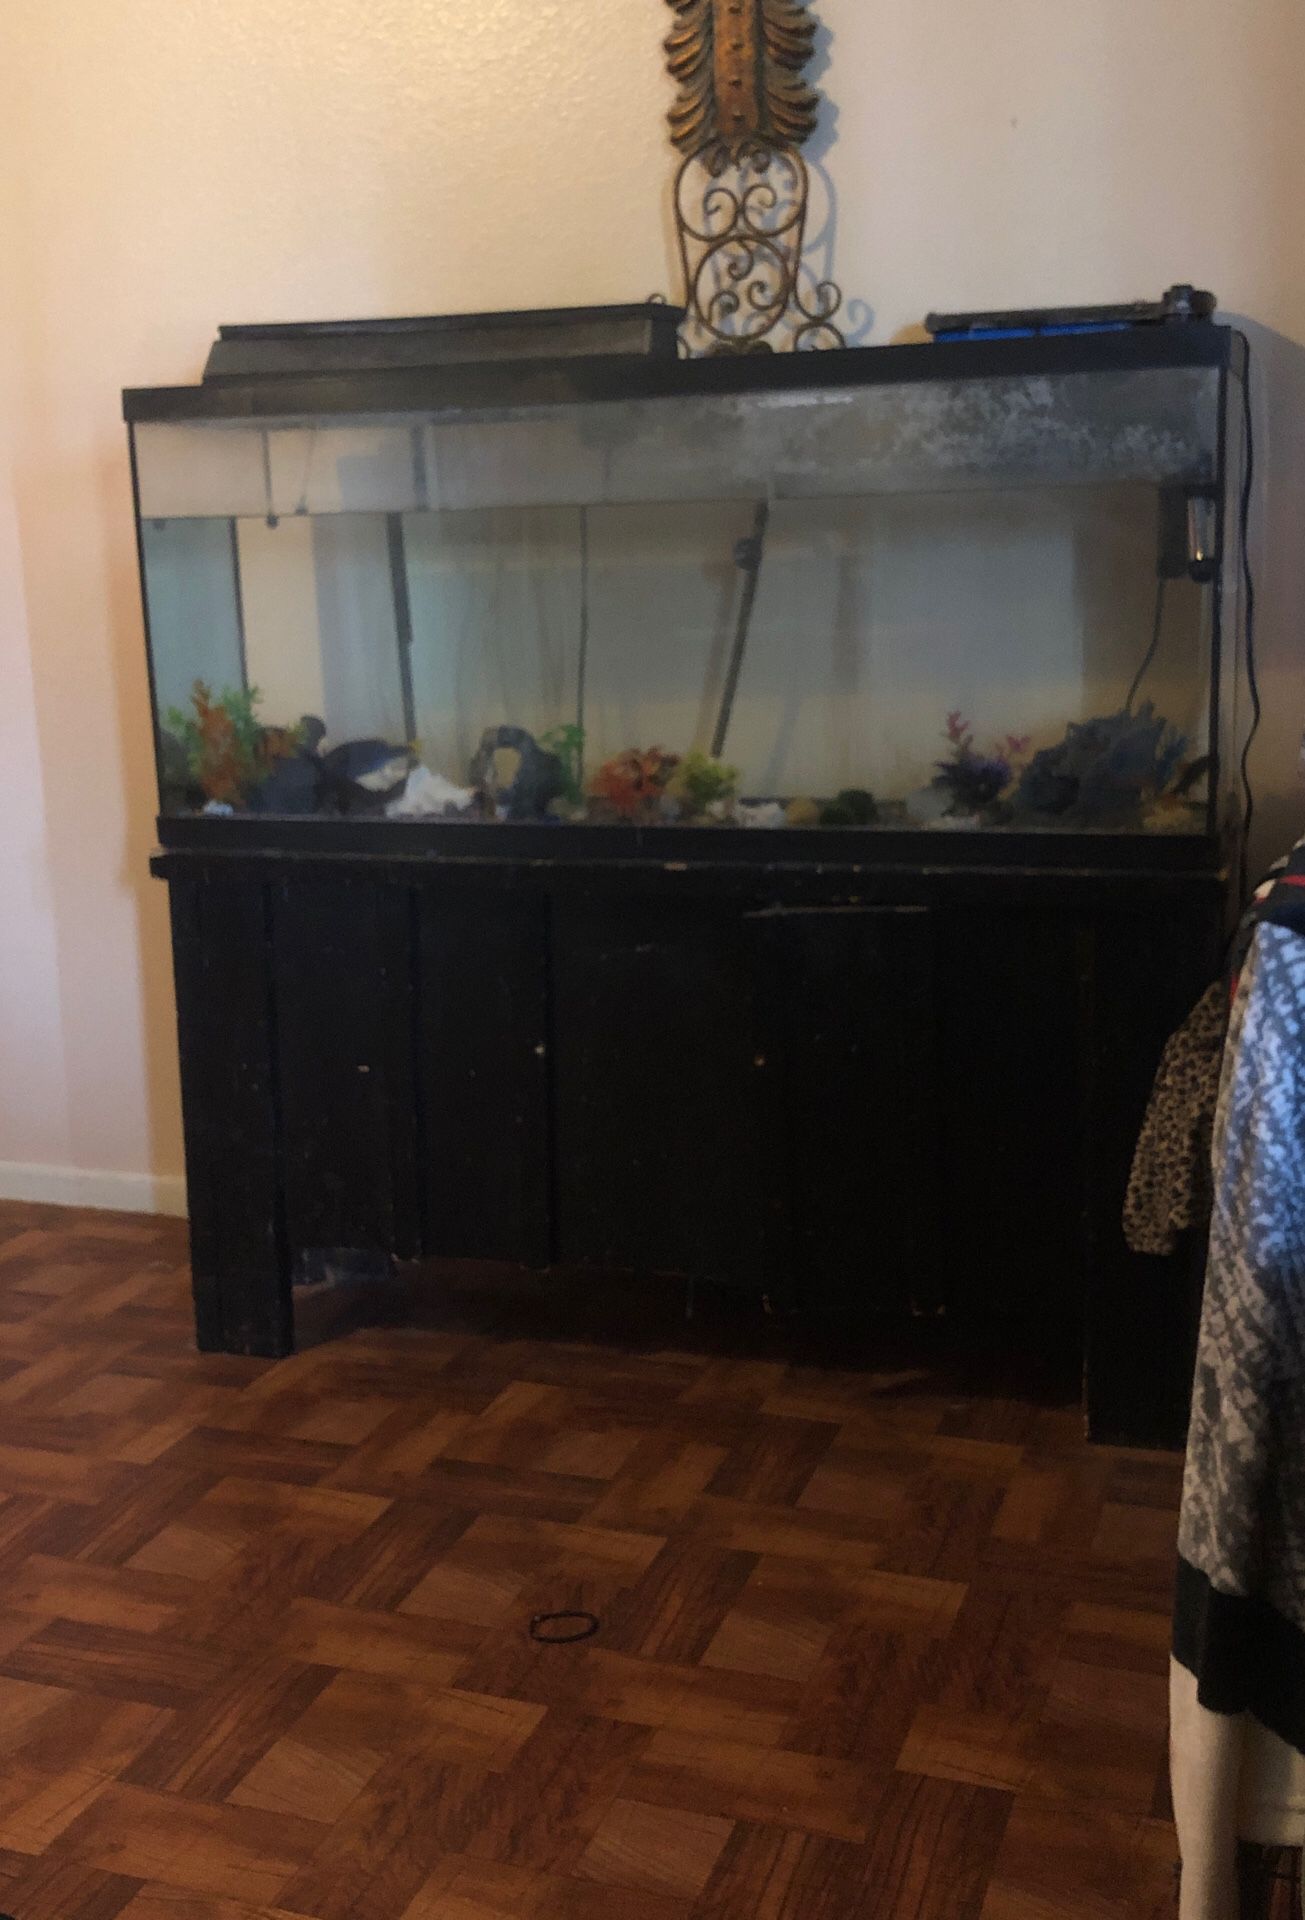 Fish tank for sale!!!